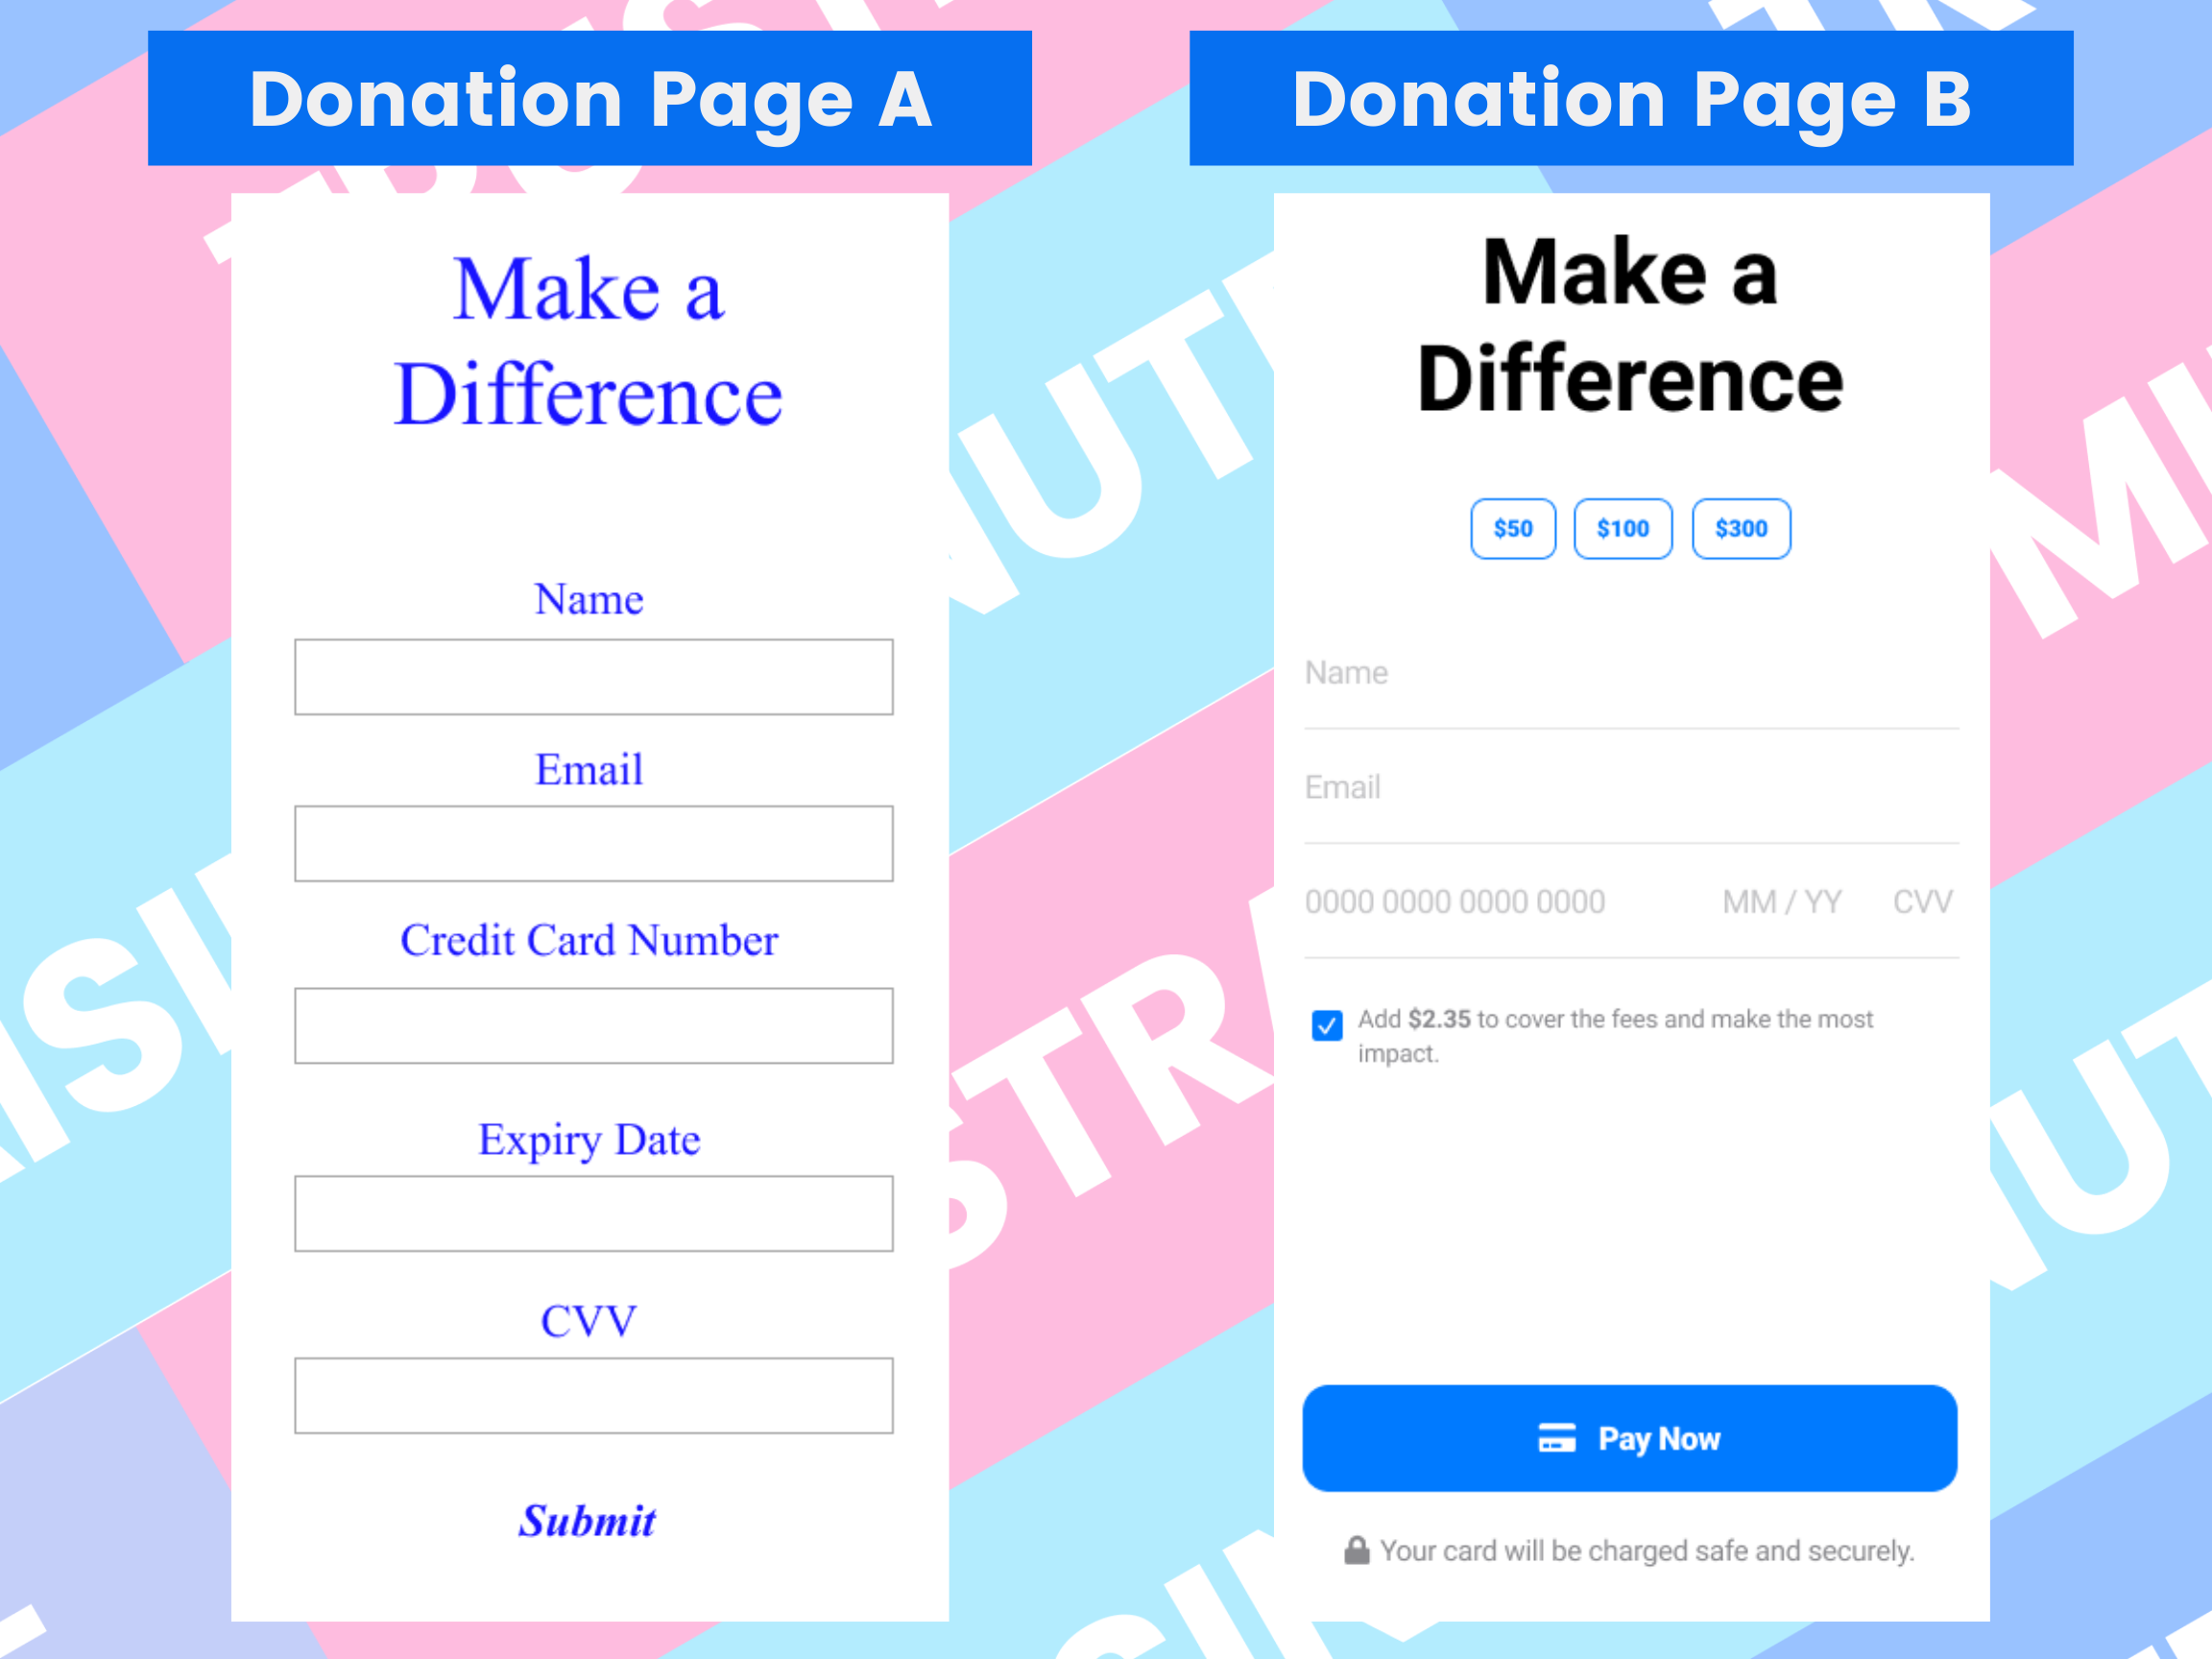 Comparing two donation pages to see which builds more trust with supporters.